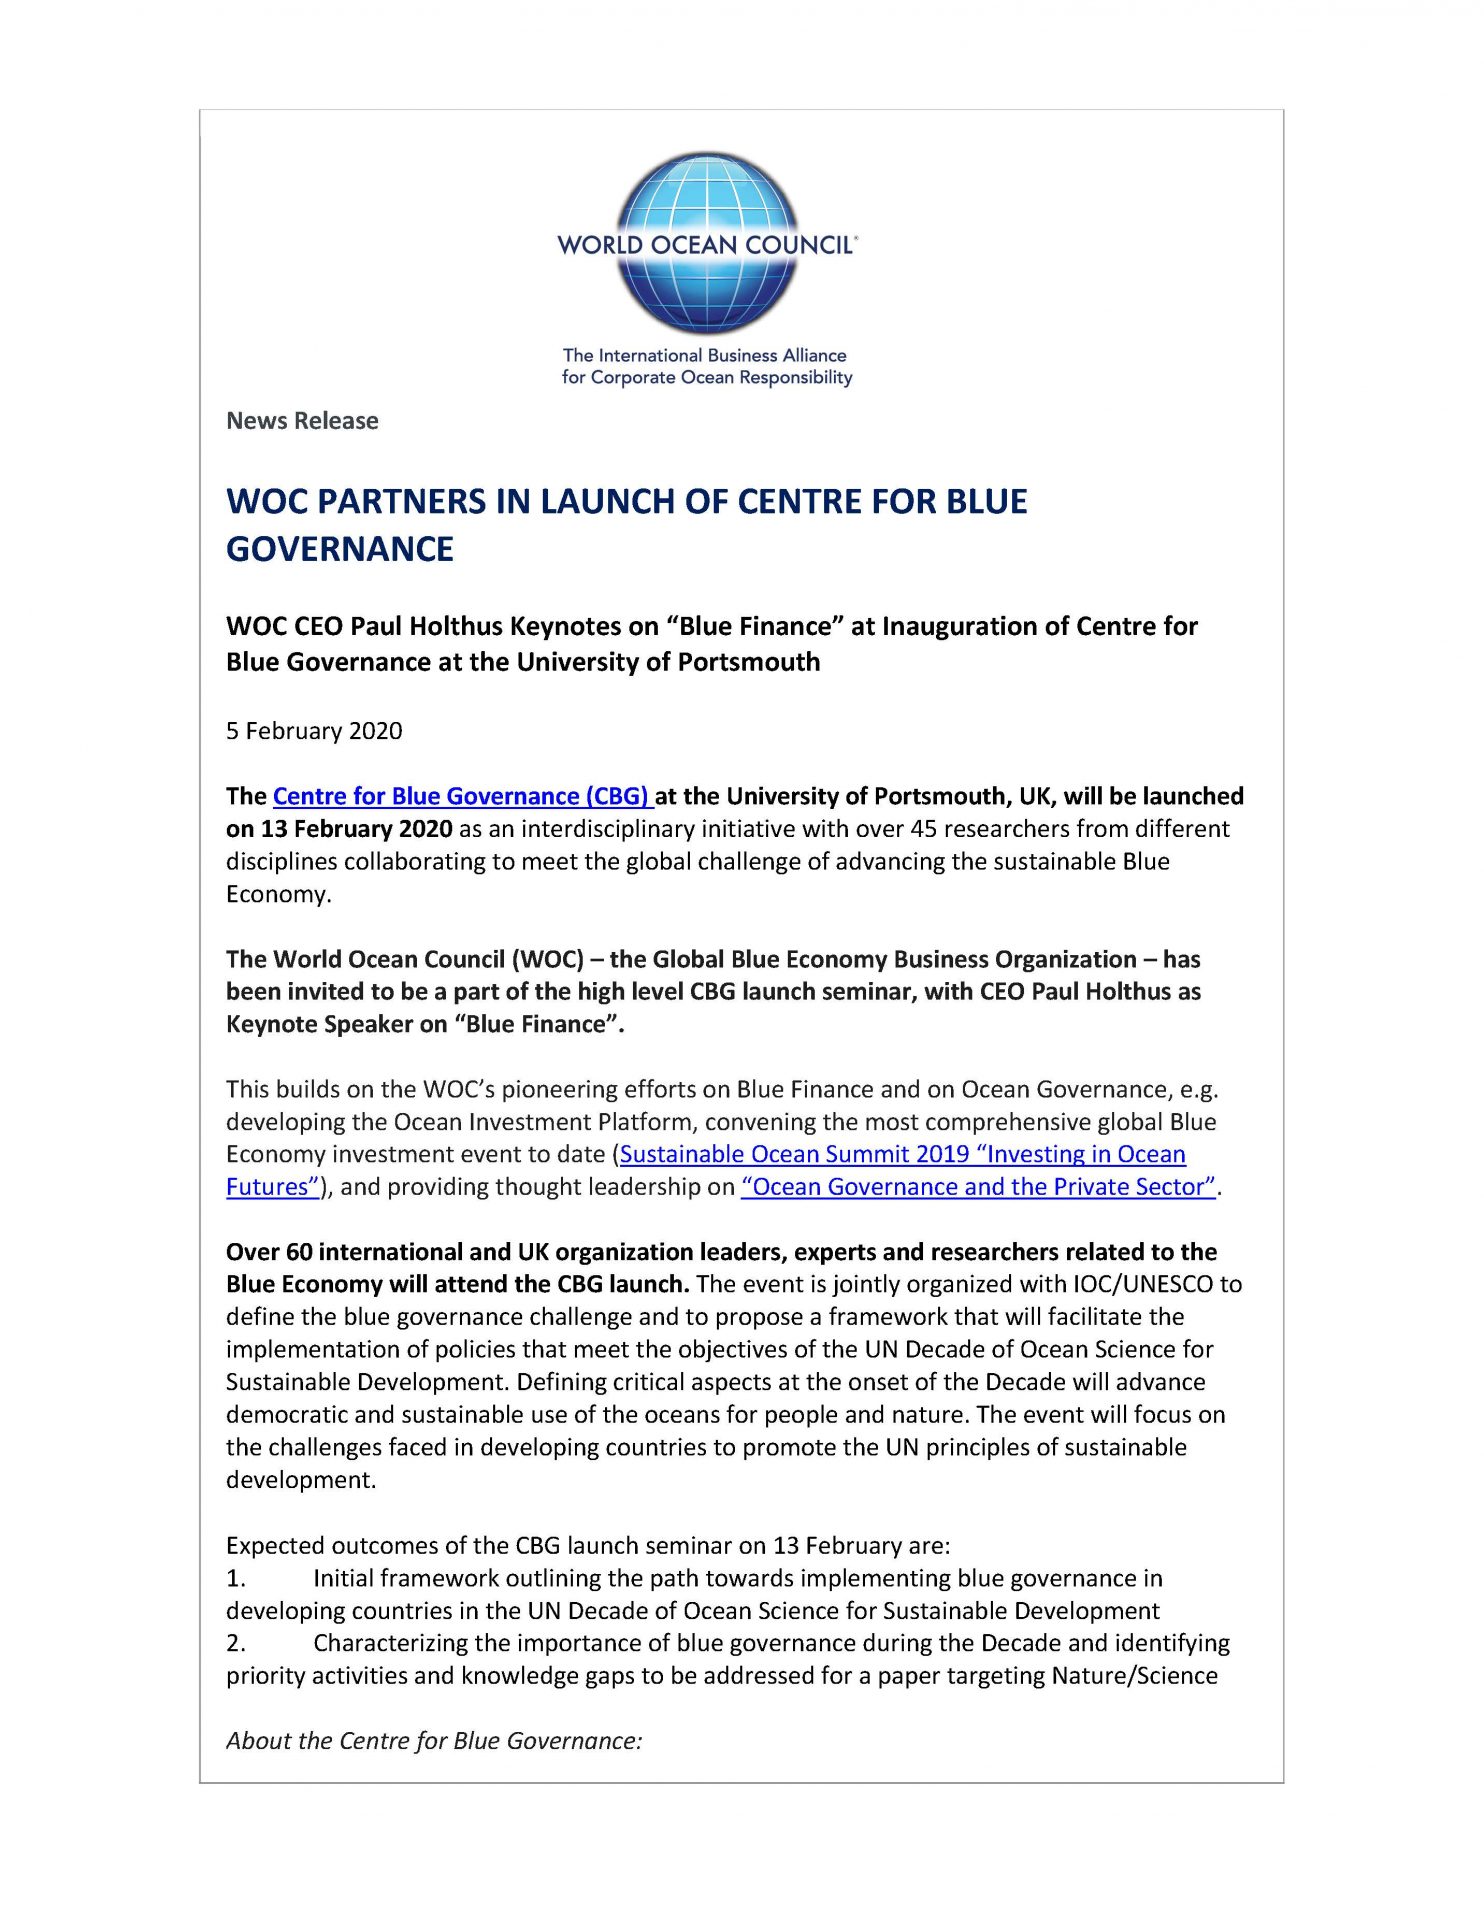 WOC Partners in Launch of Centre for Blue Governance - 5 February 2020